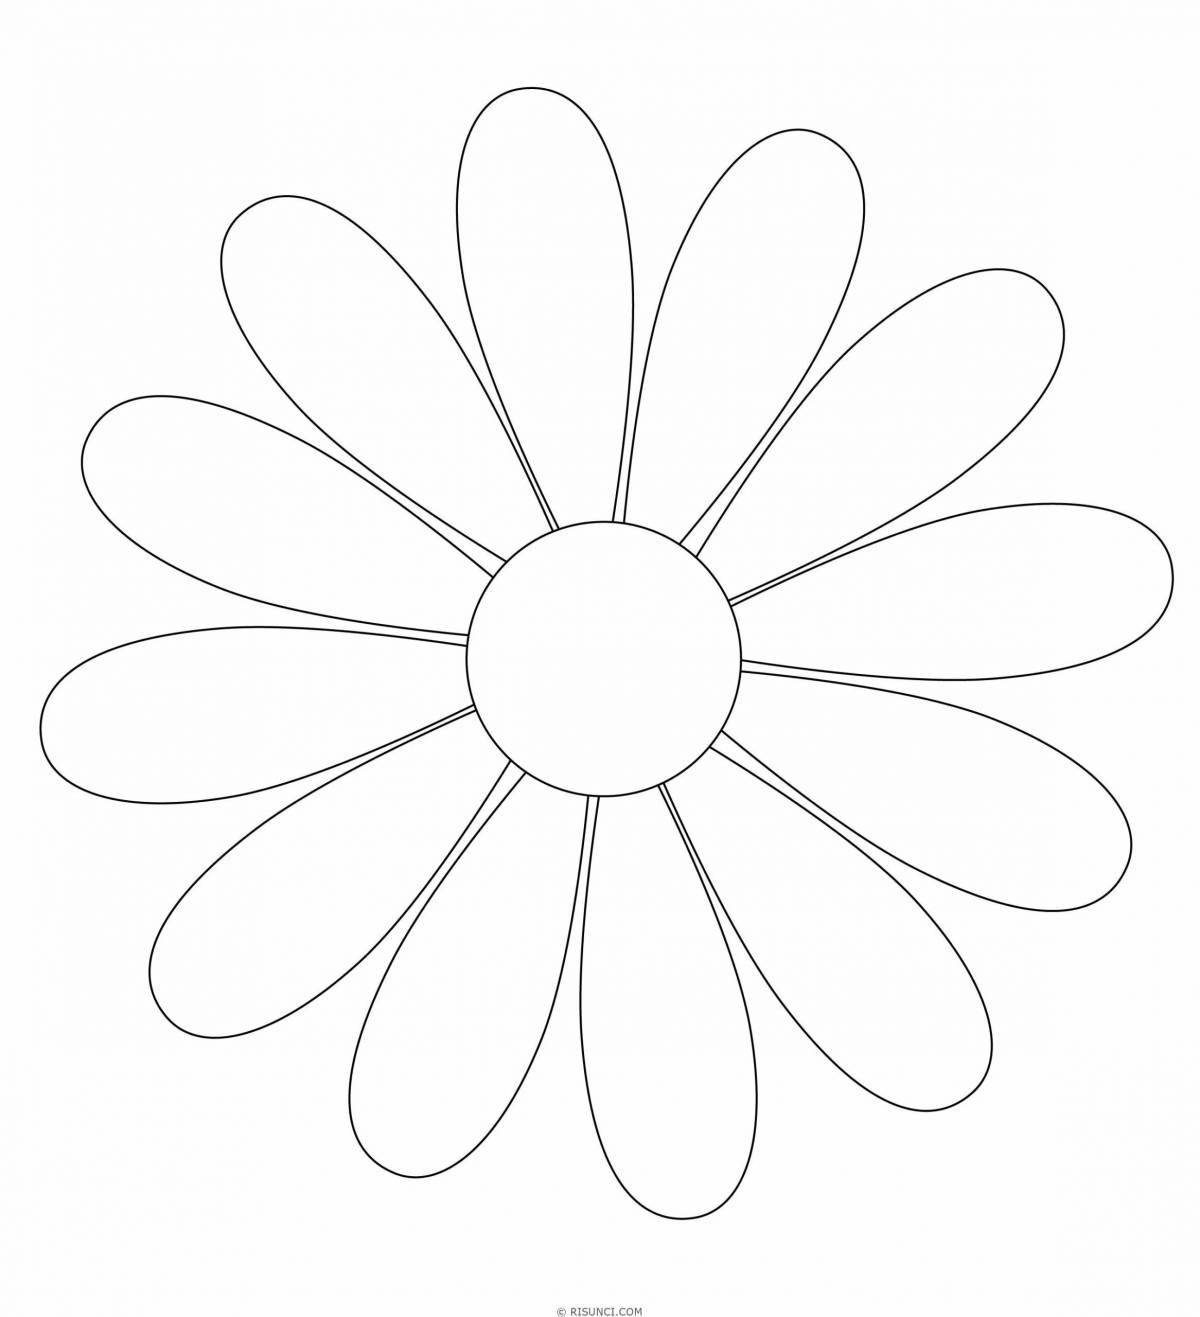 Playful coloring flower without a stem